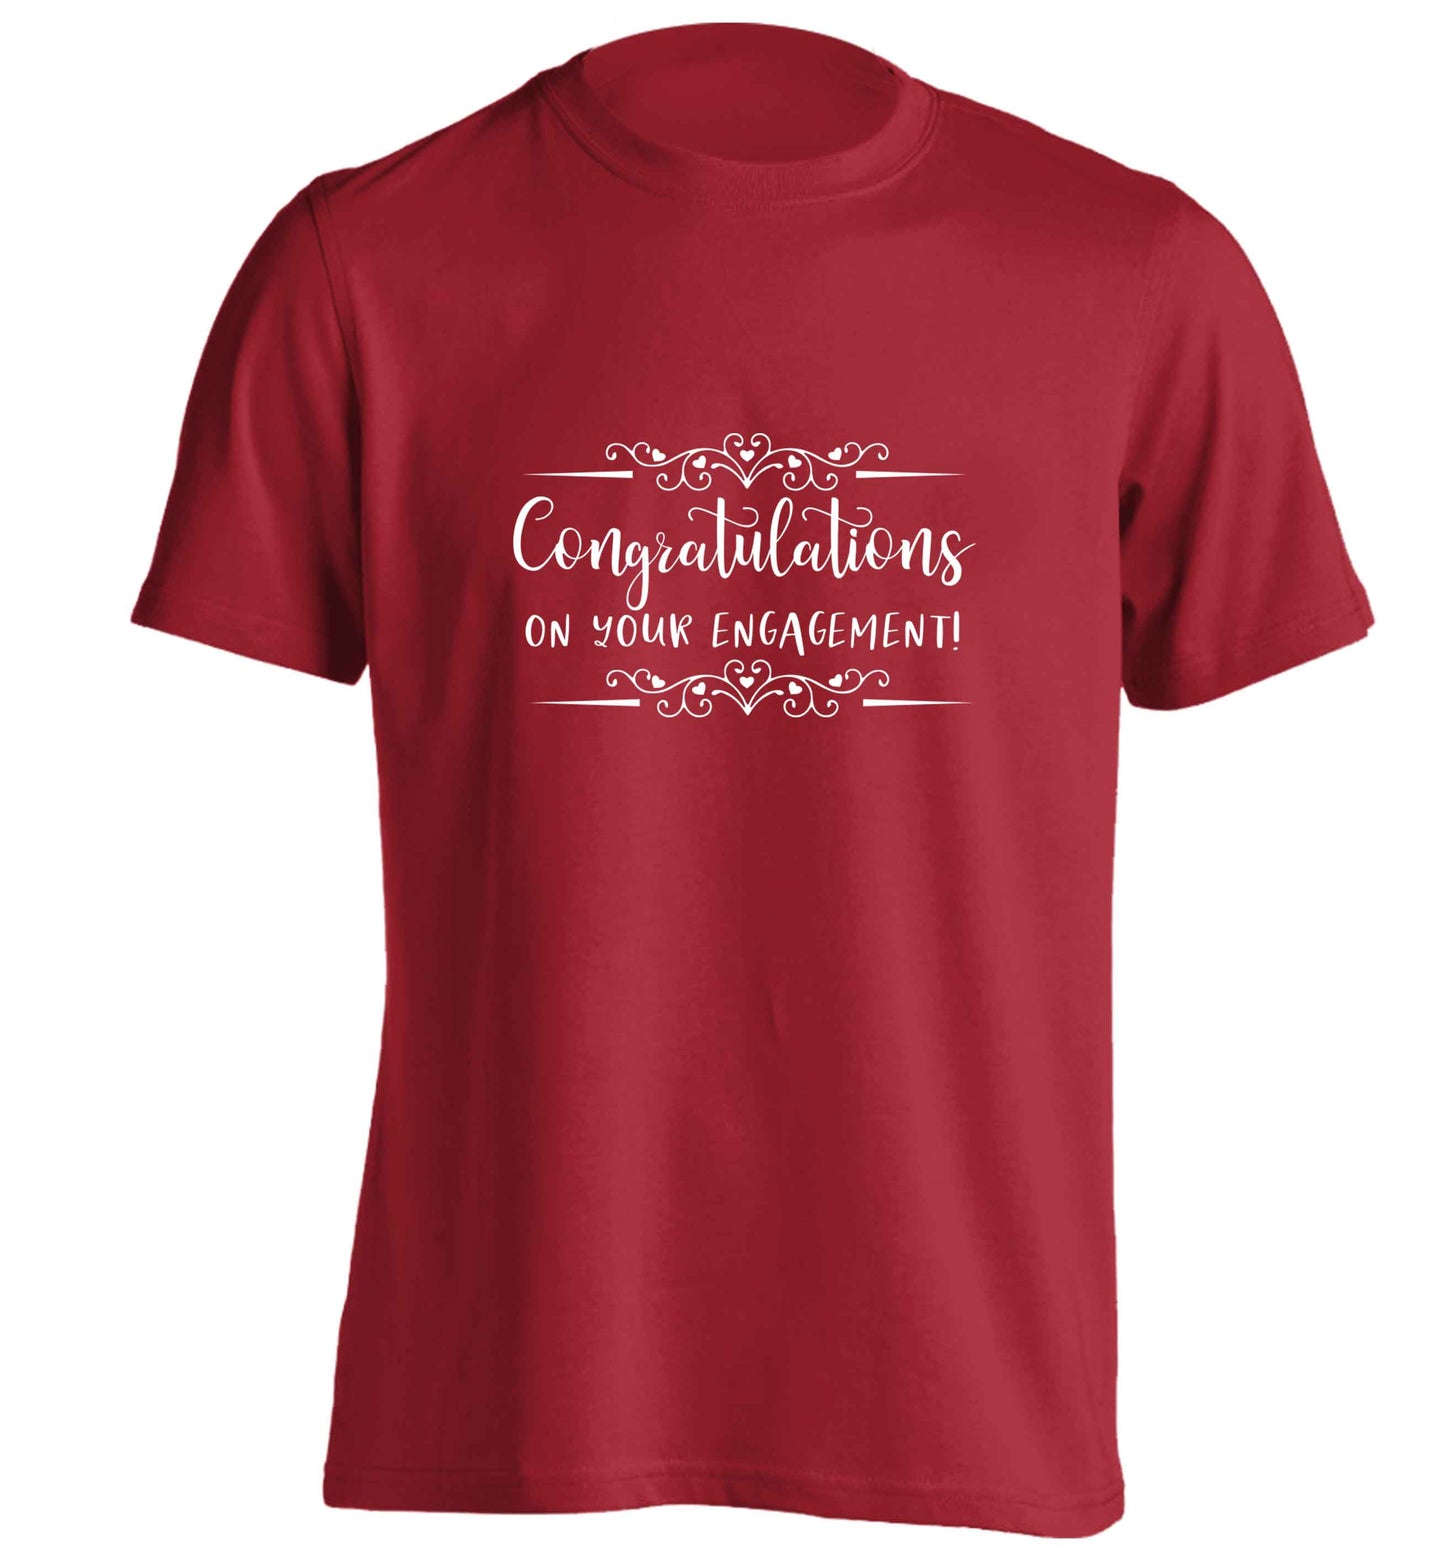 Congratulations on your engagement adults unisex red Tshirt 2XL